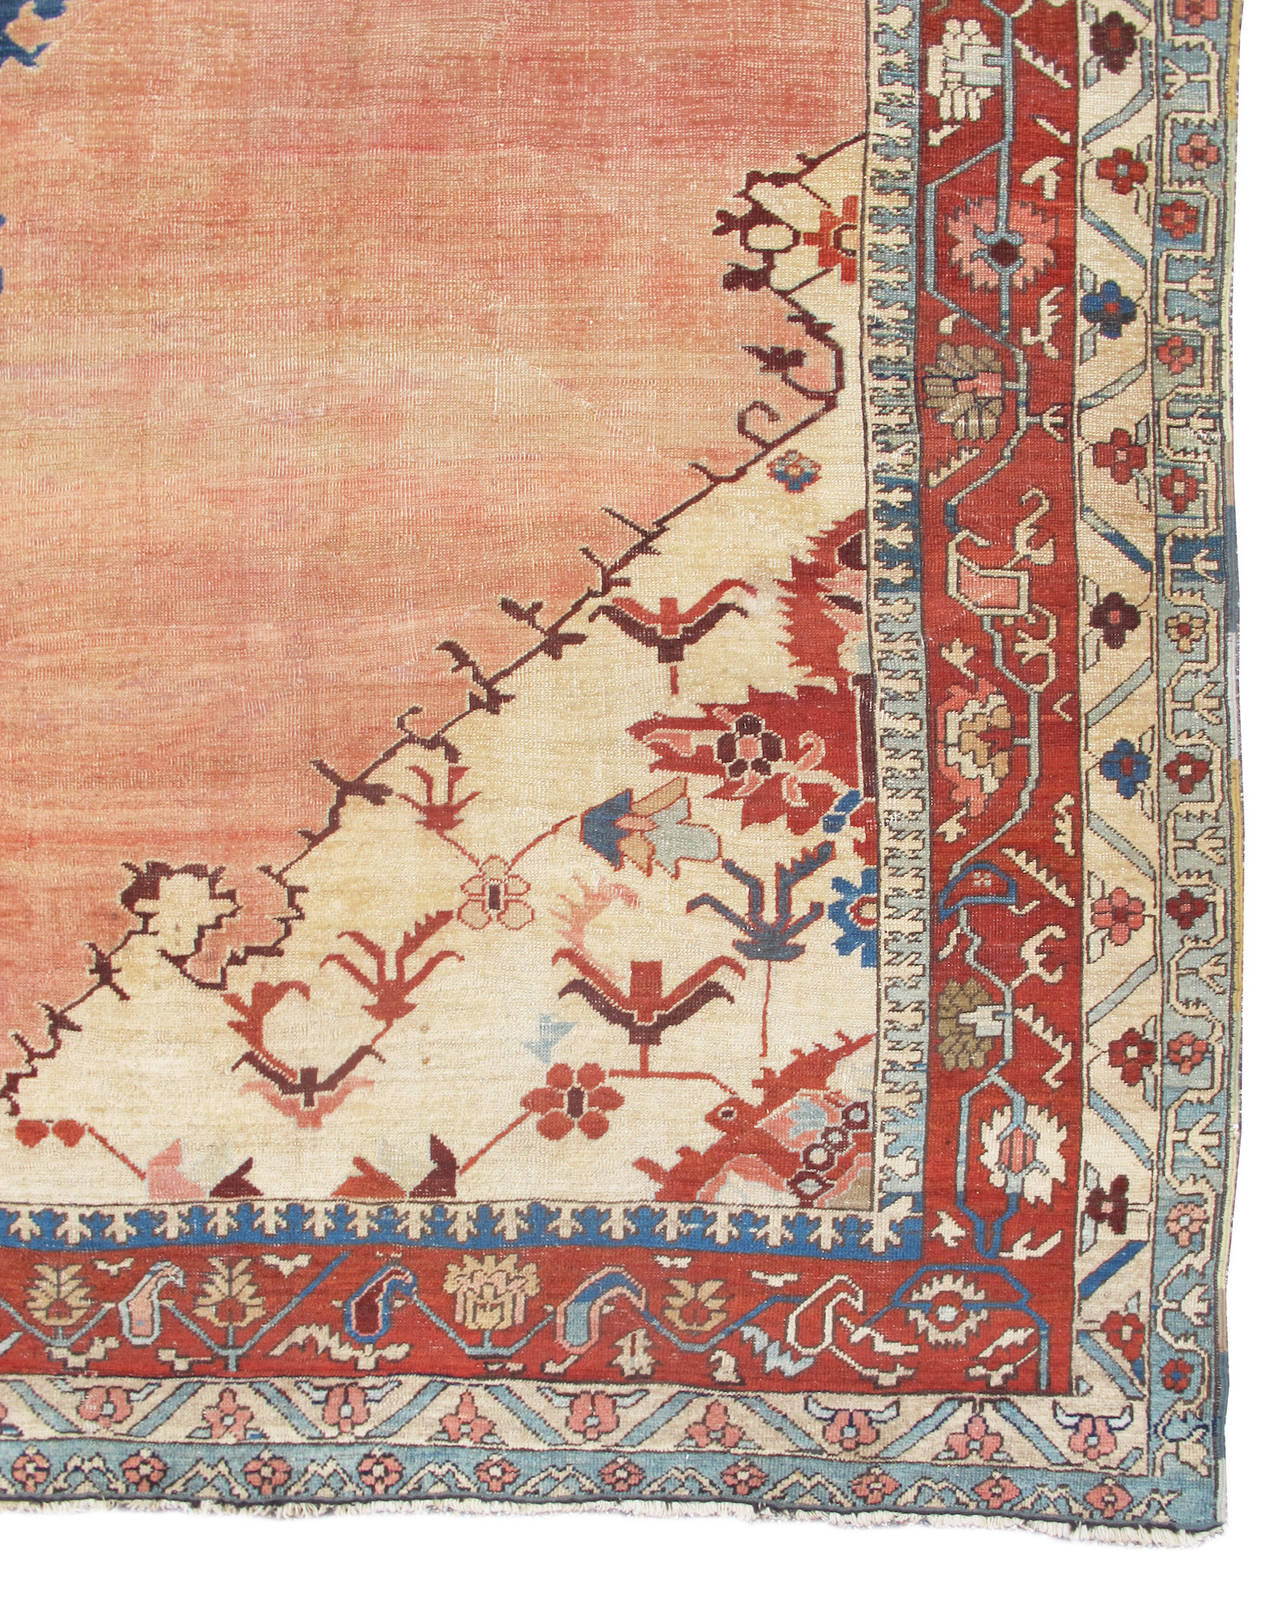 As early as the beginning of the 20th century, within American carpet circles, the finest production of carpets from the area of Heriz in the far northwest of Persia were referred to as Serapi. Much like the origin of these weavings, the origin of